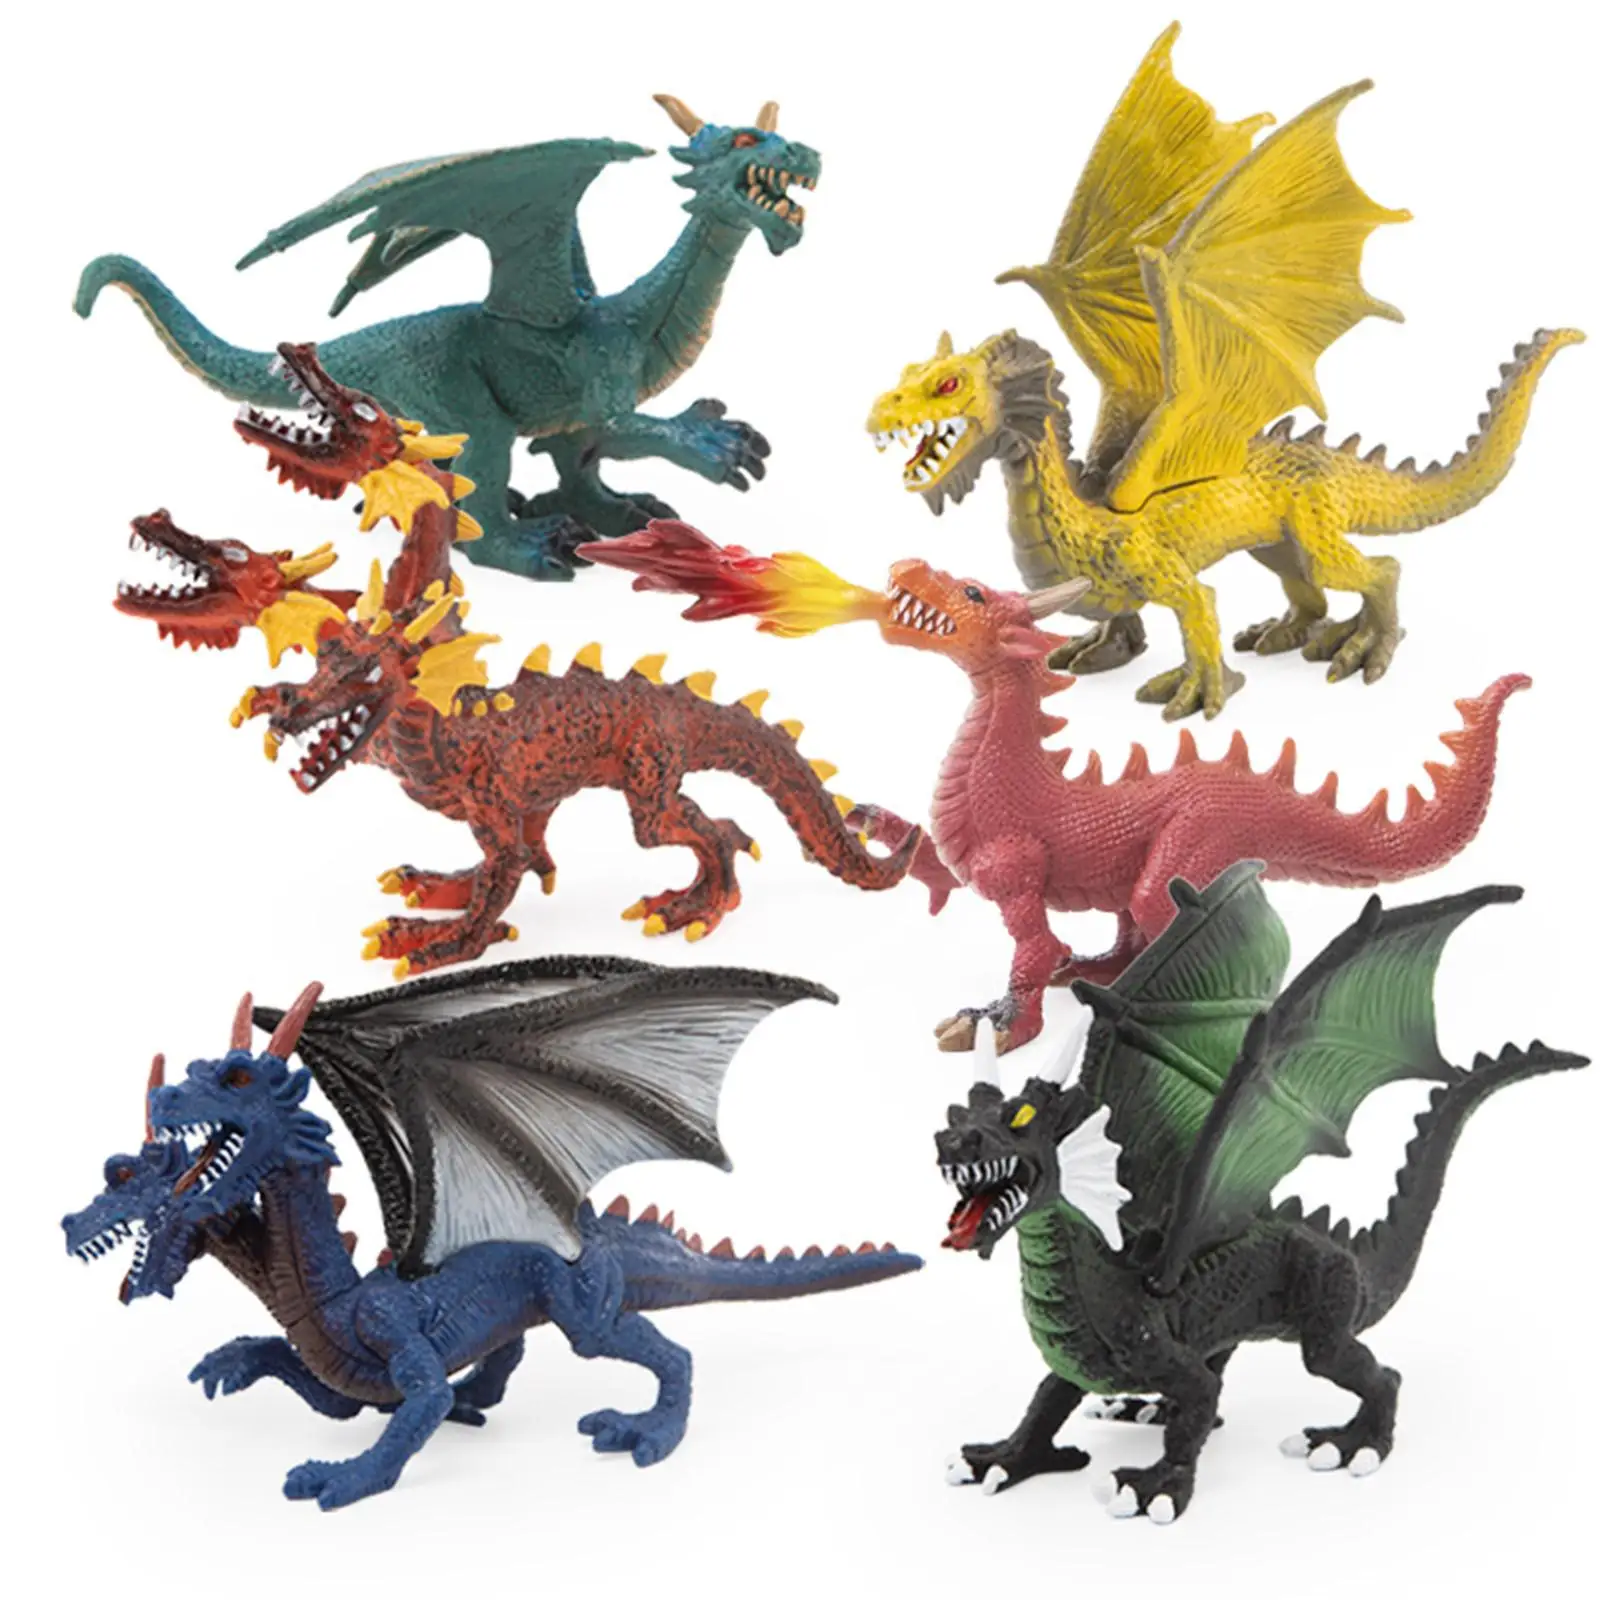 6 Pieces Dragon Figurines Colorful Educational Toy Doll Dragon Figures Kids Toy Action Figurine for Party Prop Collection